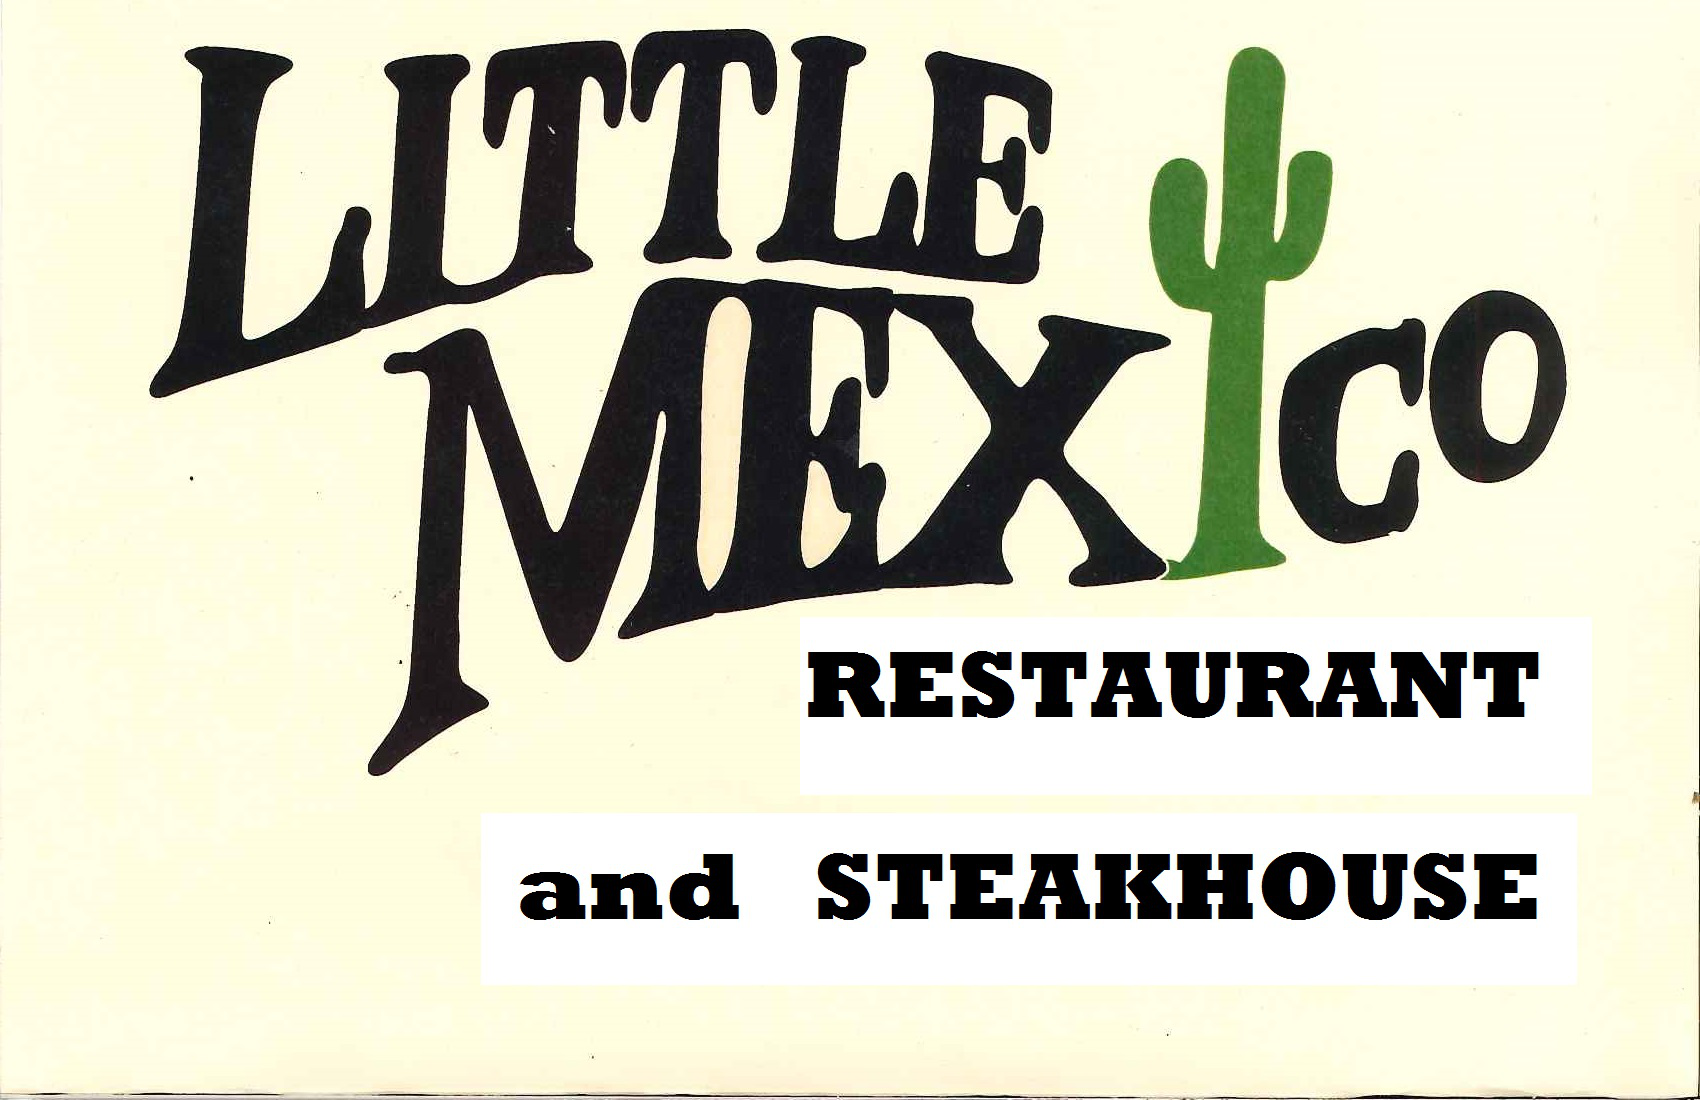 https://www.tucsonrodeoparade.com/wp-content/uploads/2016/03/Little-Mexico-logo_Page_1-2015.png